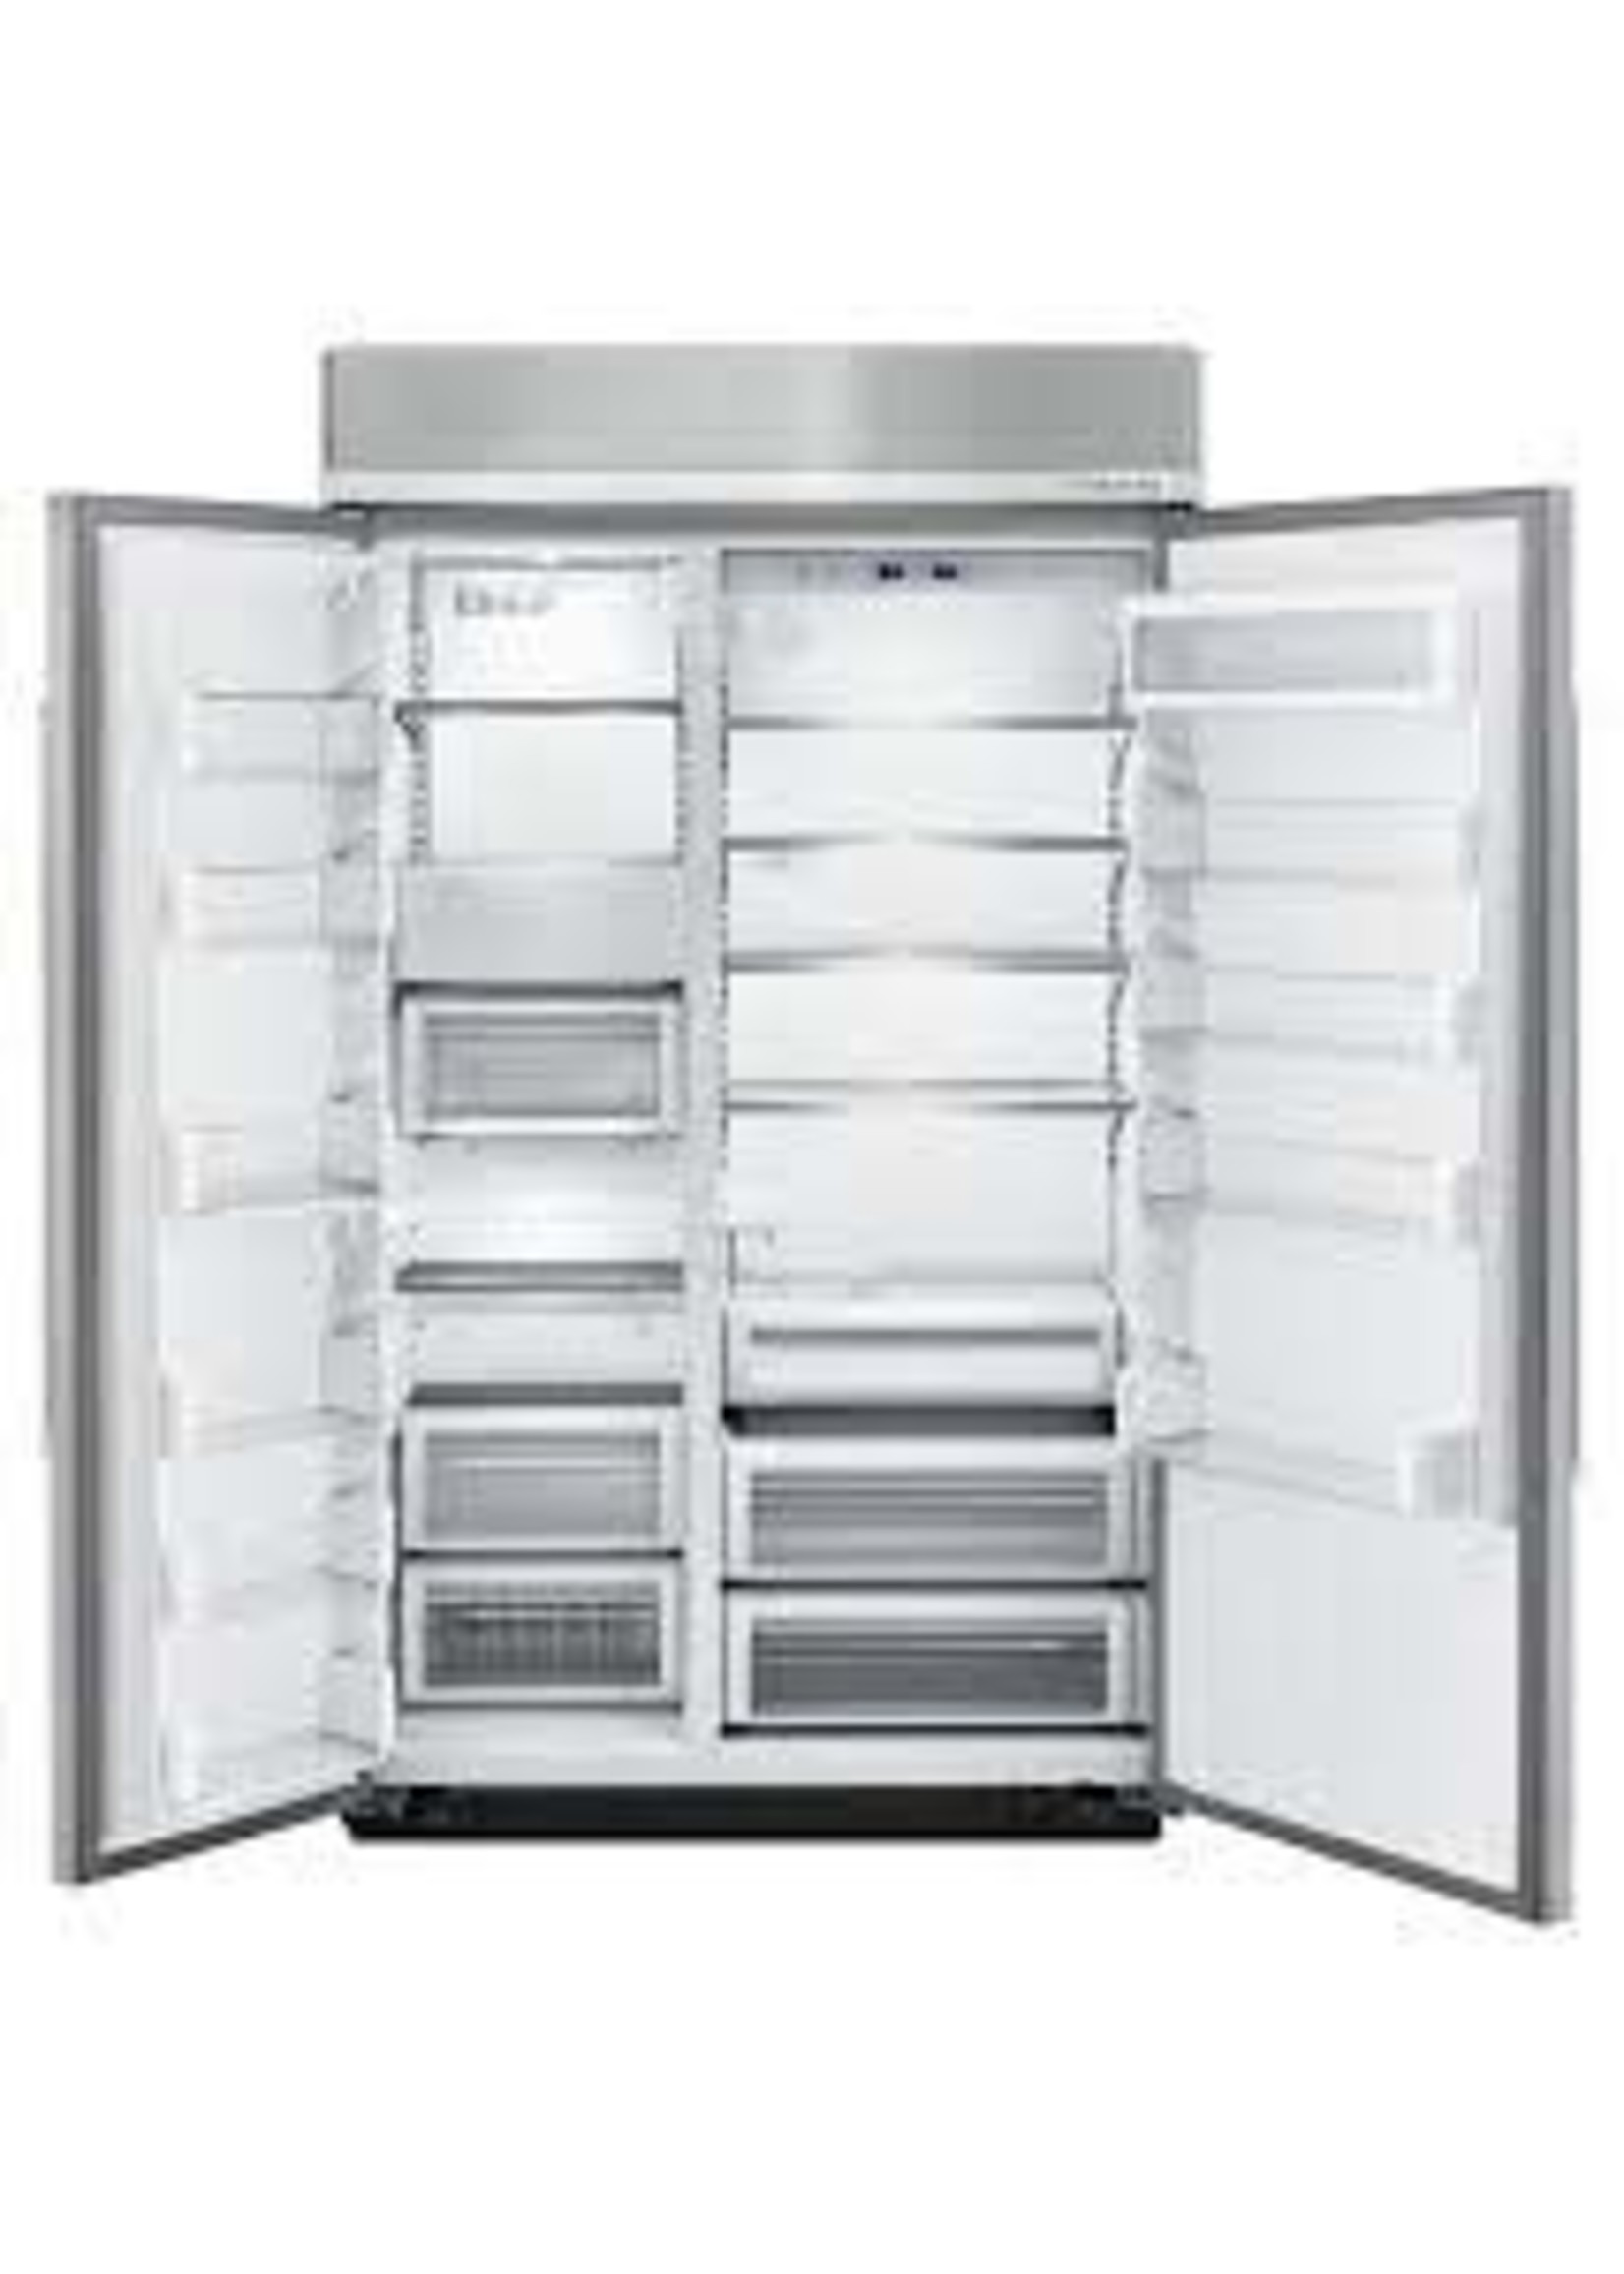 KITCHEN AID KitchenAid  48" Built-In Side-by-Side Refrigerator with Automatic Ice Maker